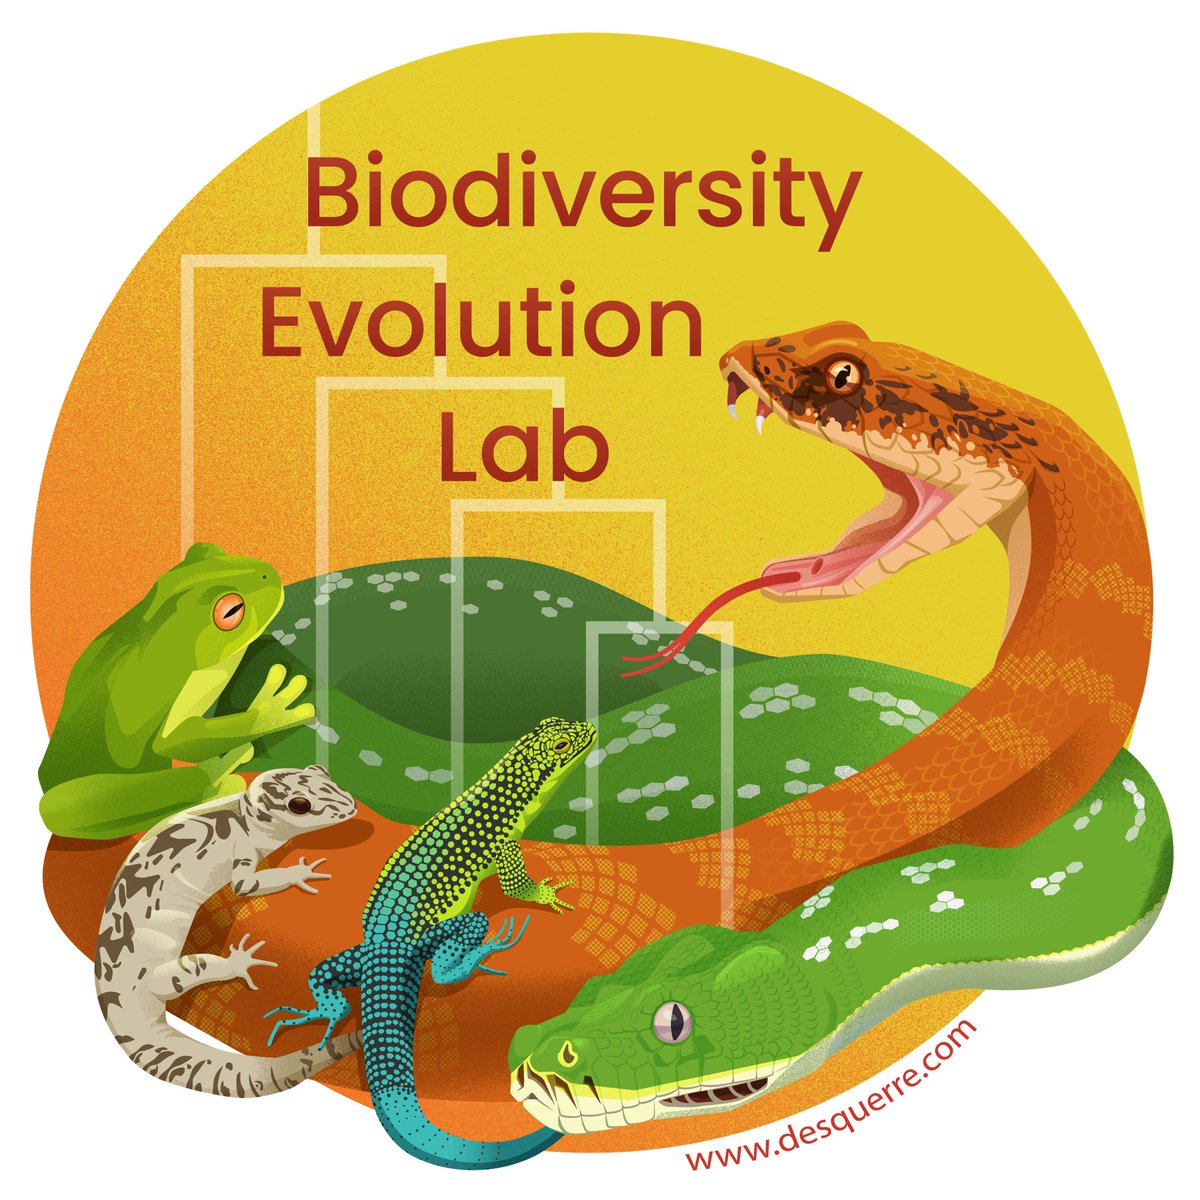 Thanks to @GraphicsSci for the amazing logo of the research group I established at @UOW. Send me an email if you are looking for a PhD project on macro-evolution, phylogenetics, venom evolution, species delimitation or more! more info at desquerre.com